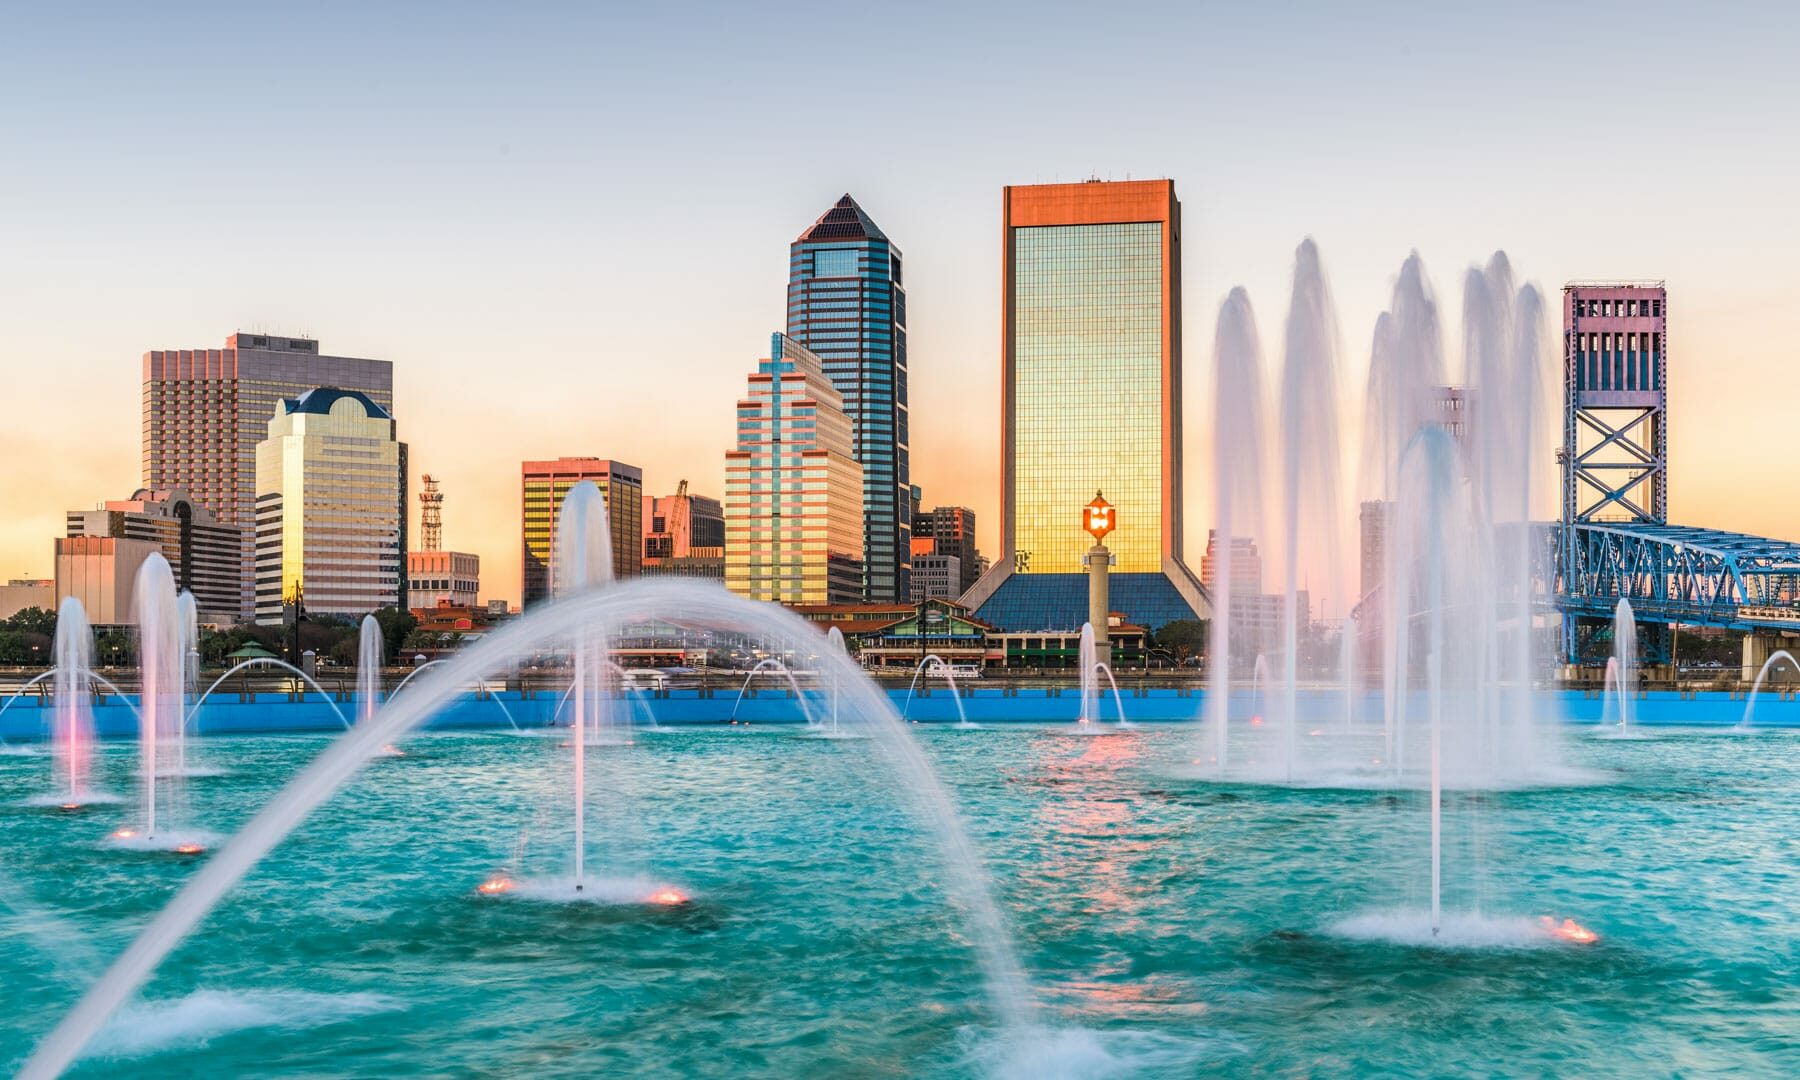 The Best Things to do in Jacksonville, Florida